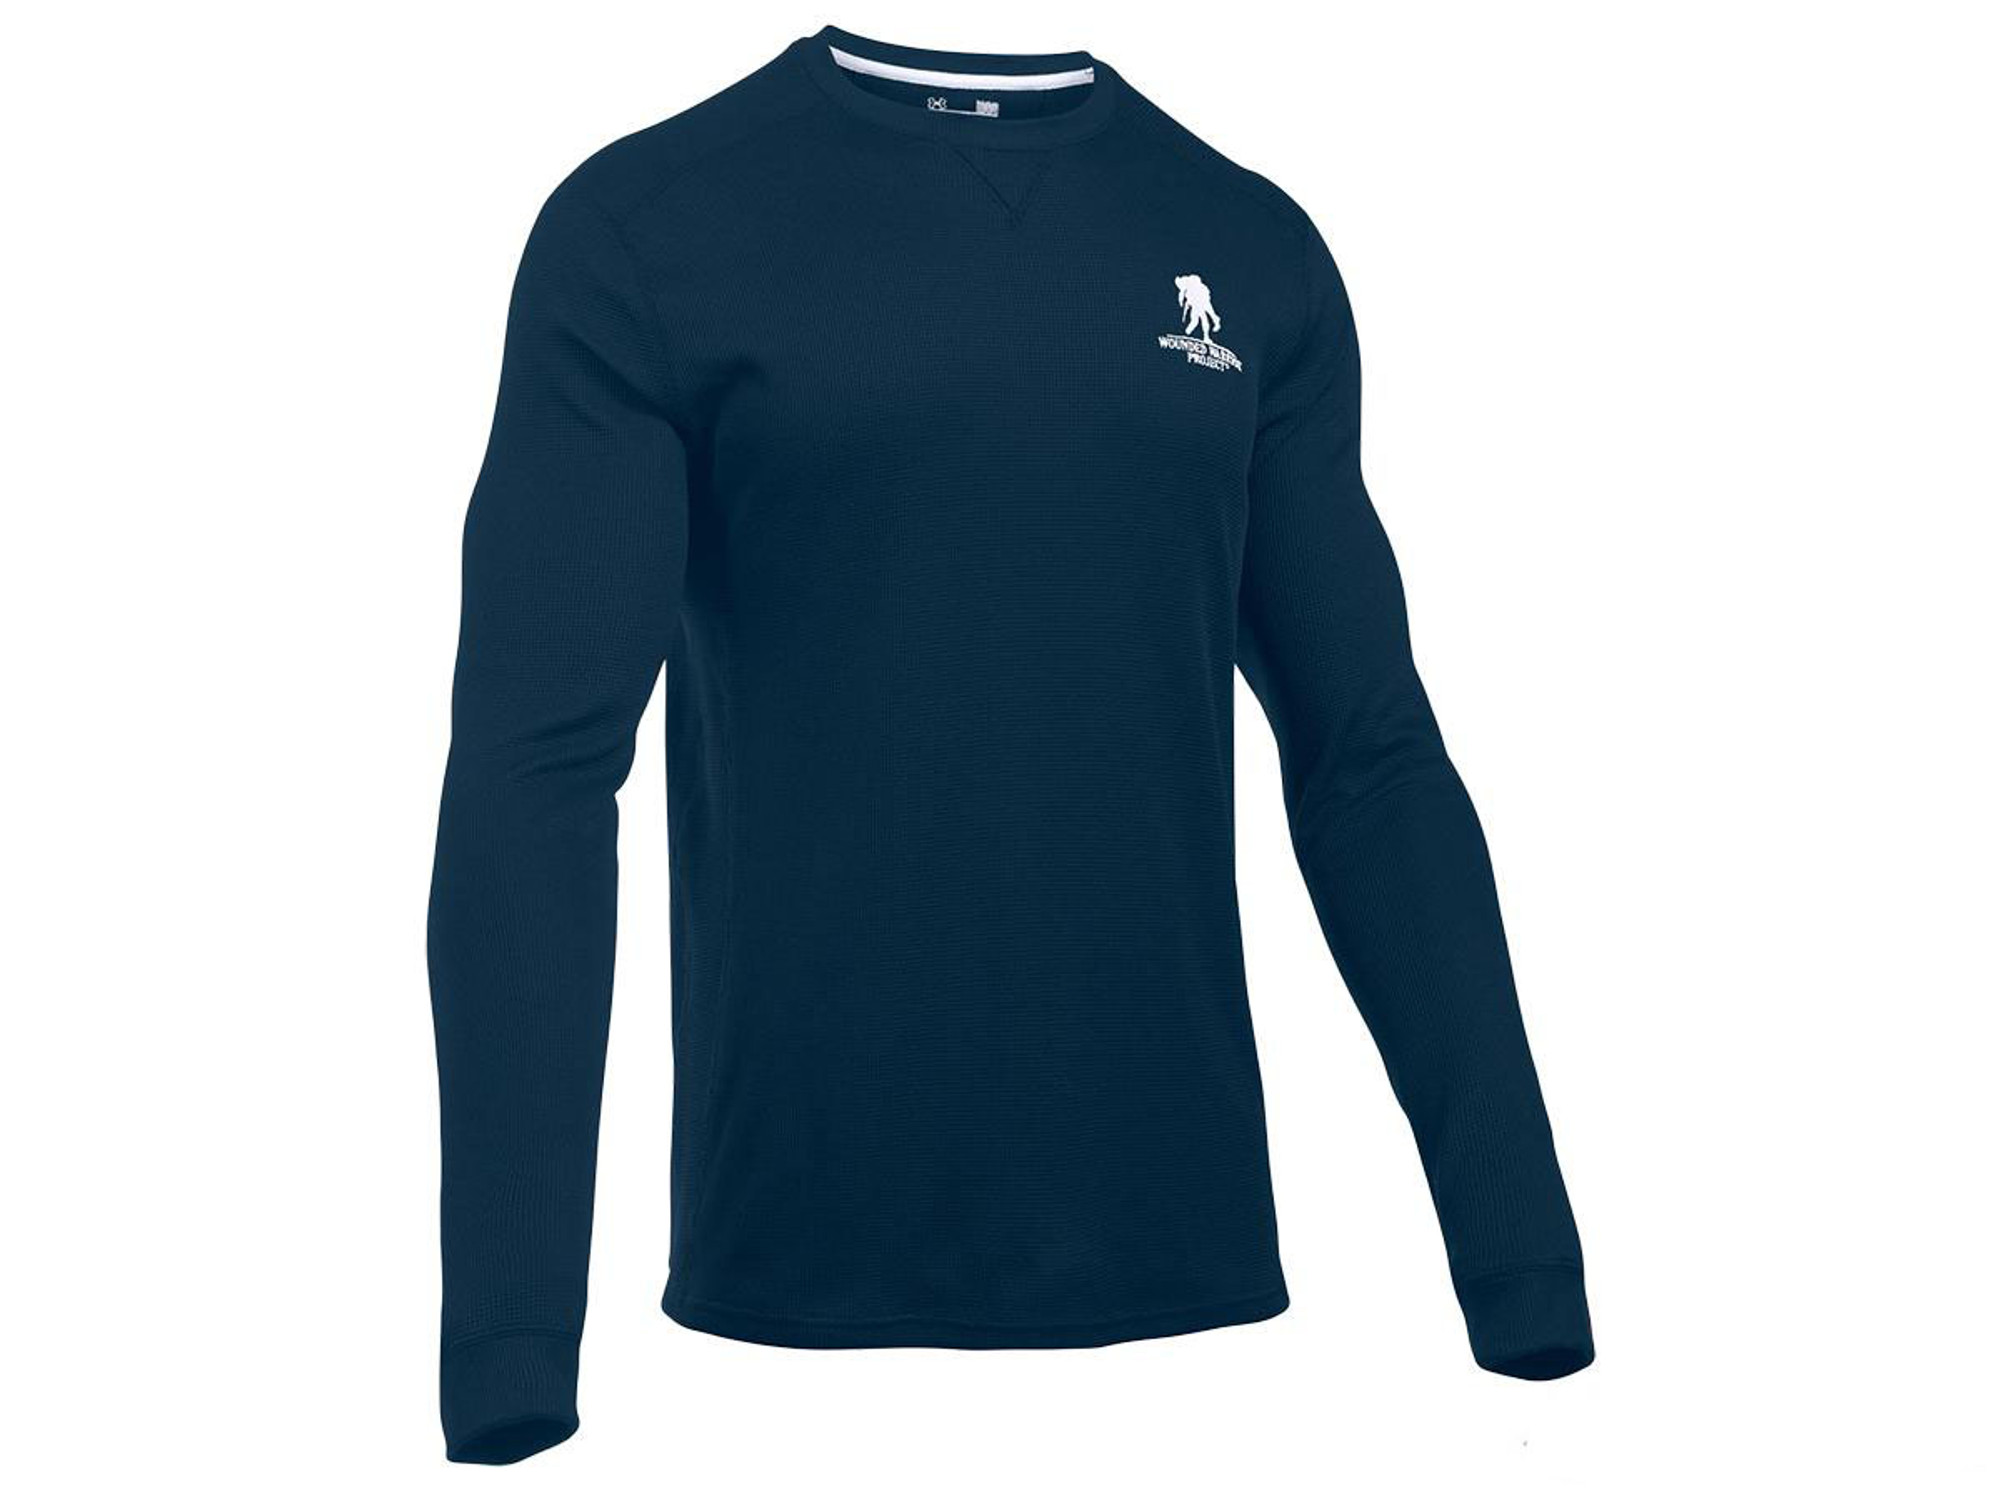 Under Armour Men's Amplify Thermal Shirt  Long sleeve tshirt men, Thermal  shirt, Under armour men